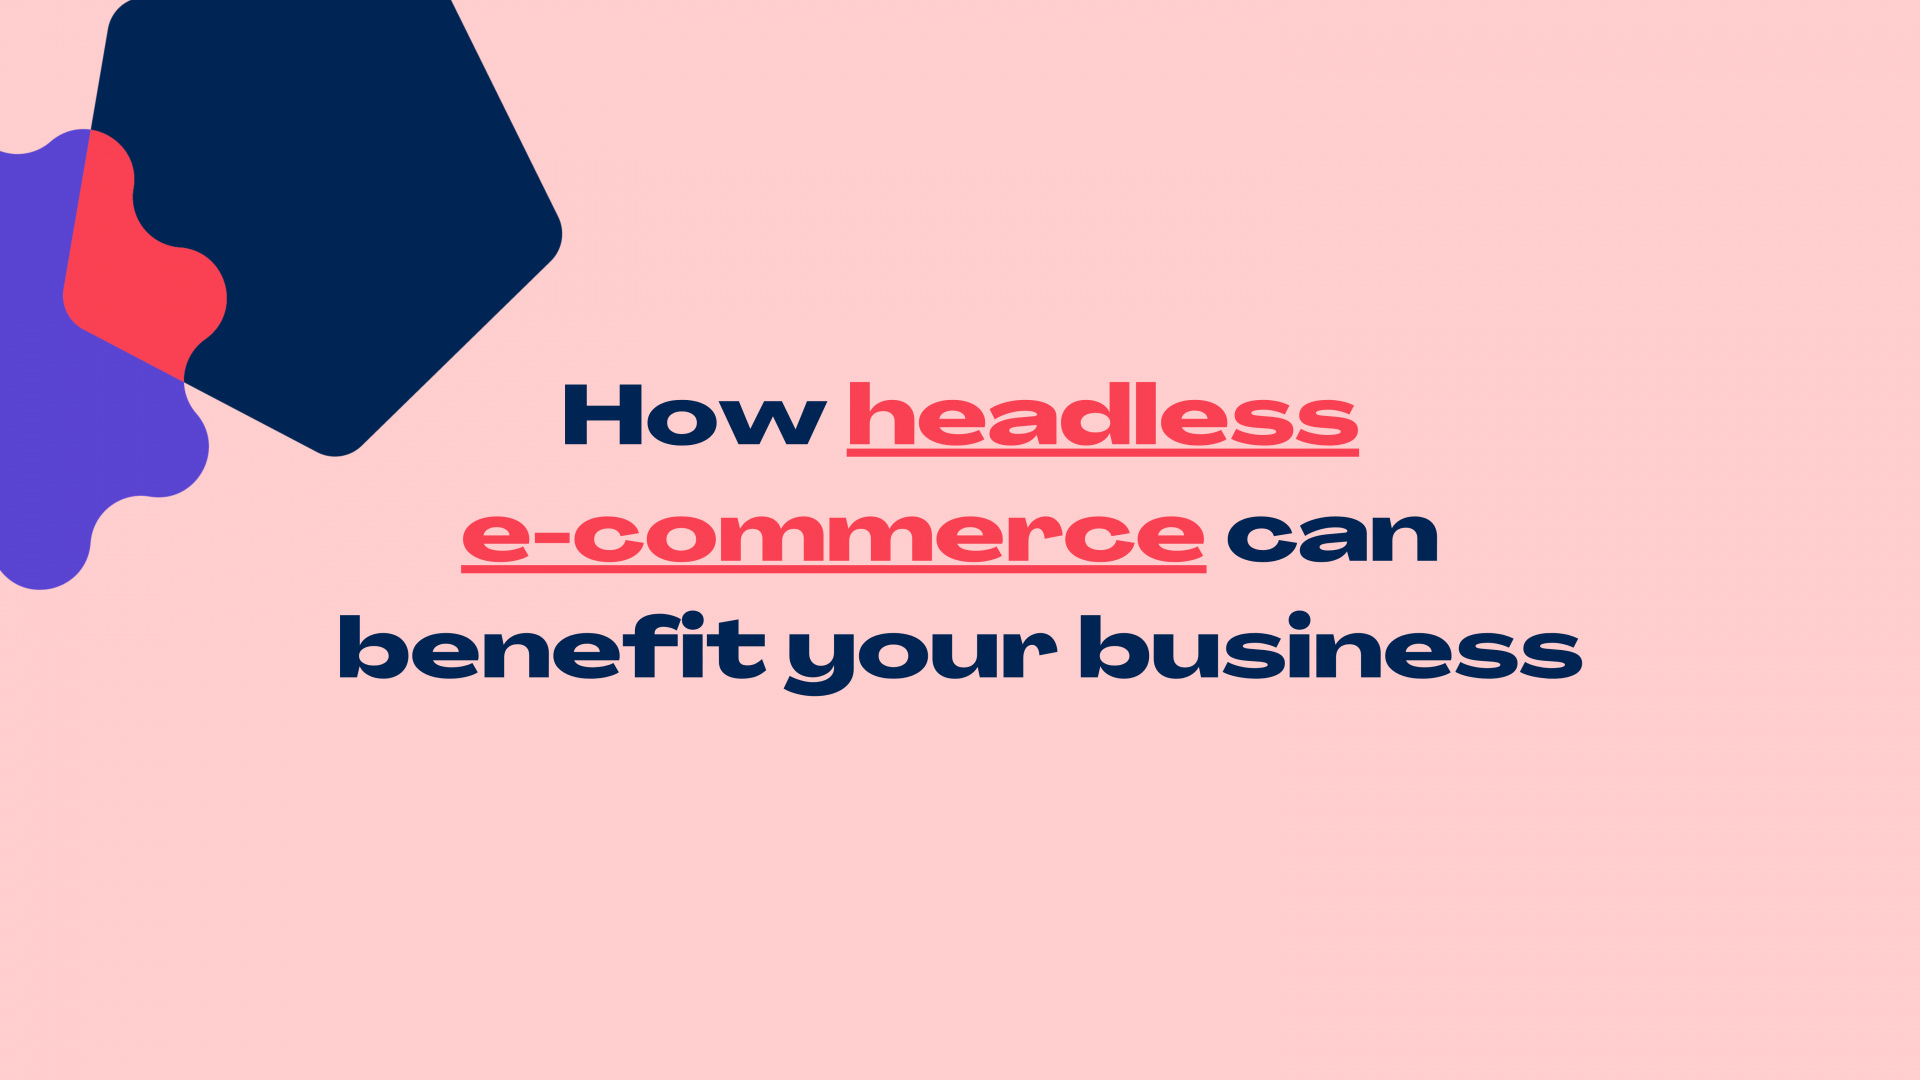 How headless e-commerce can benefit your business – webinar